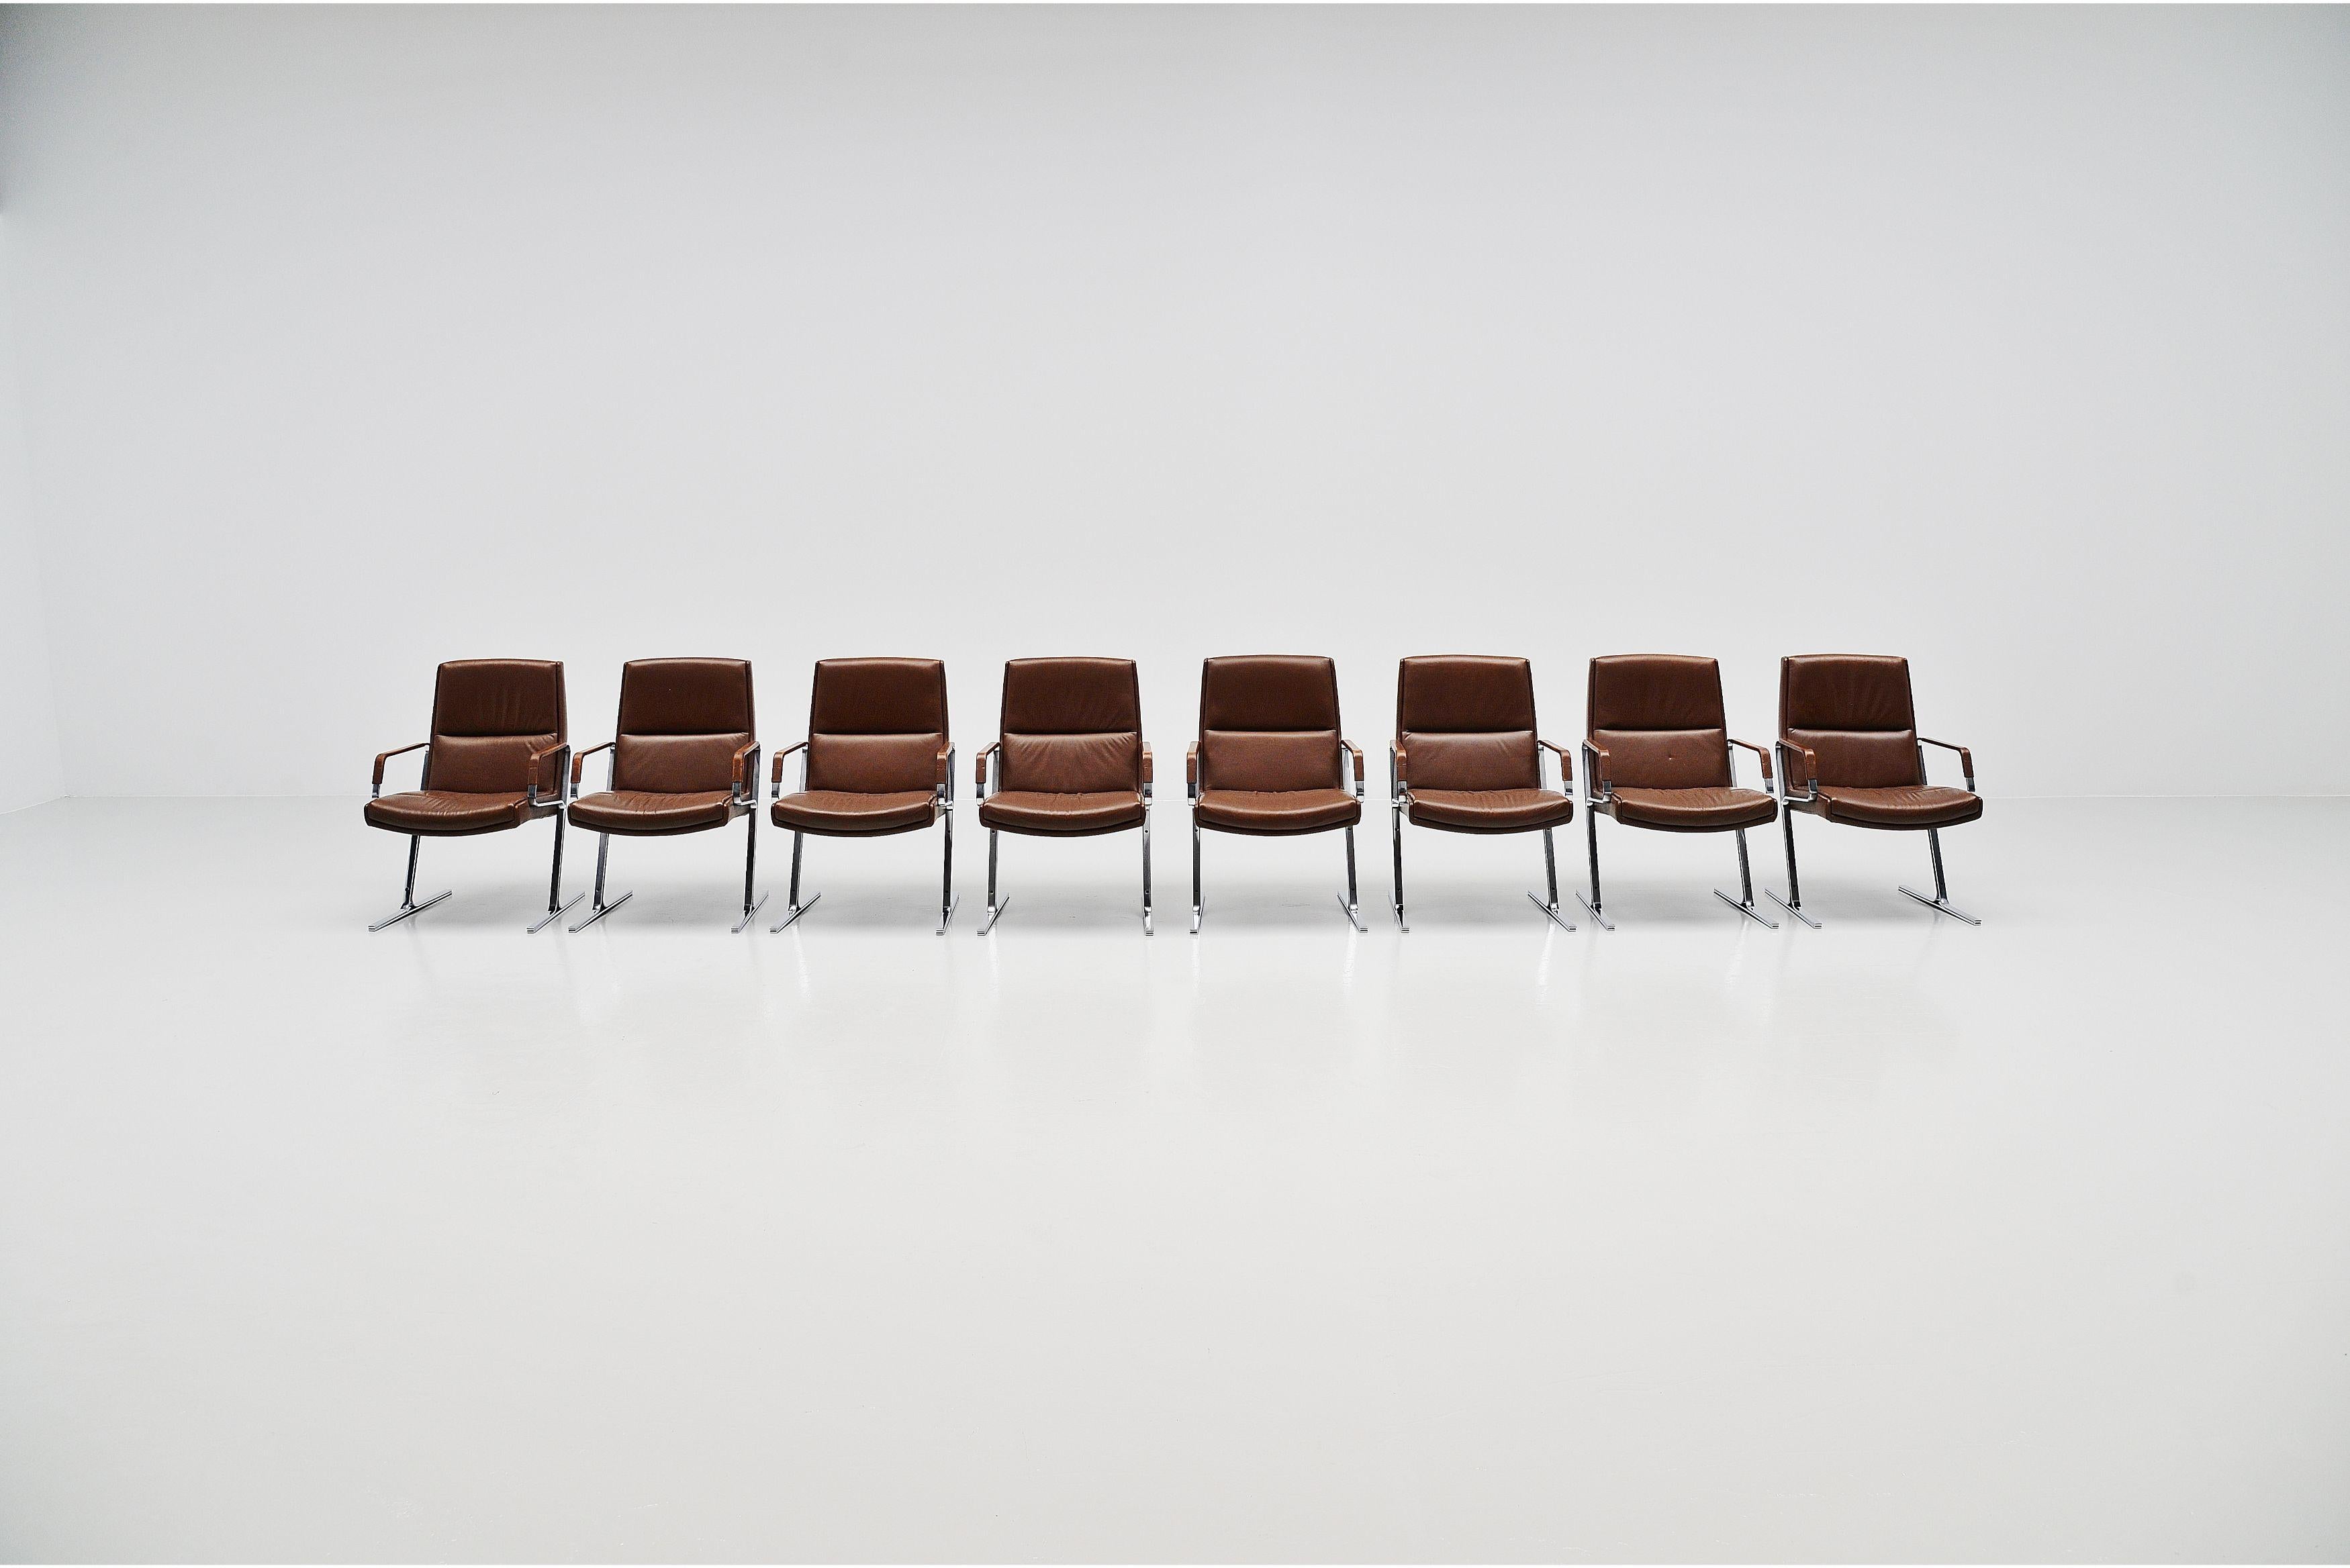 Large set of 8 office chairs model FK711 designed by Preben Fabricius and Jorgen Kastholm and manufactured by Walter Knoll, Germany 1971. These heavy office chairs have matt chrome plated, solid steel frames and chocolate brown leather upholstery.